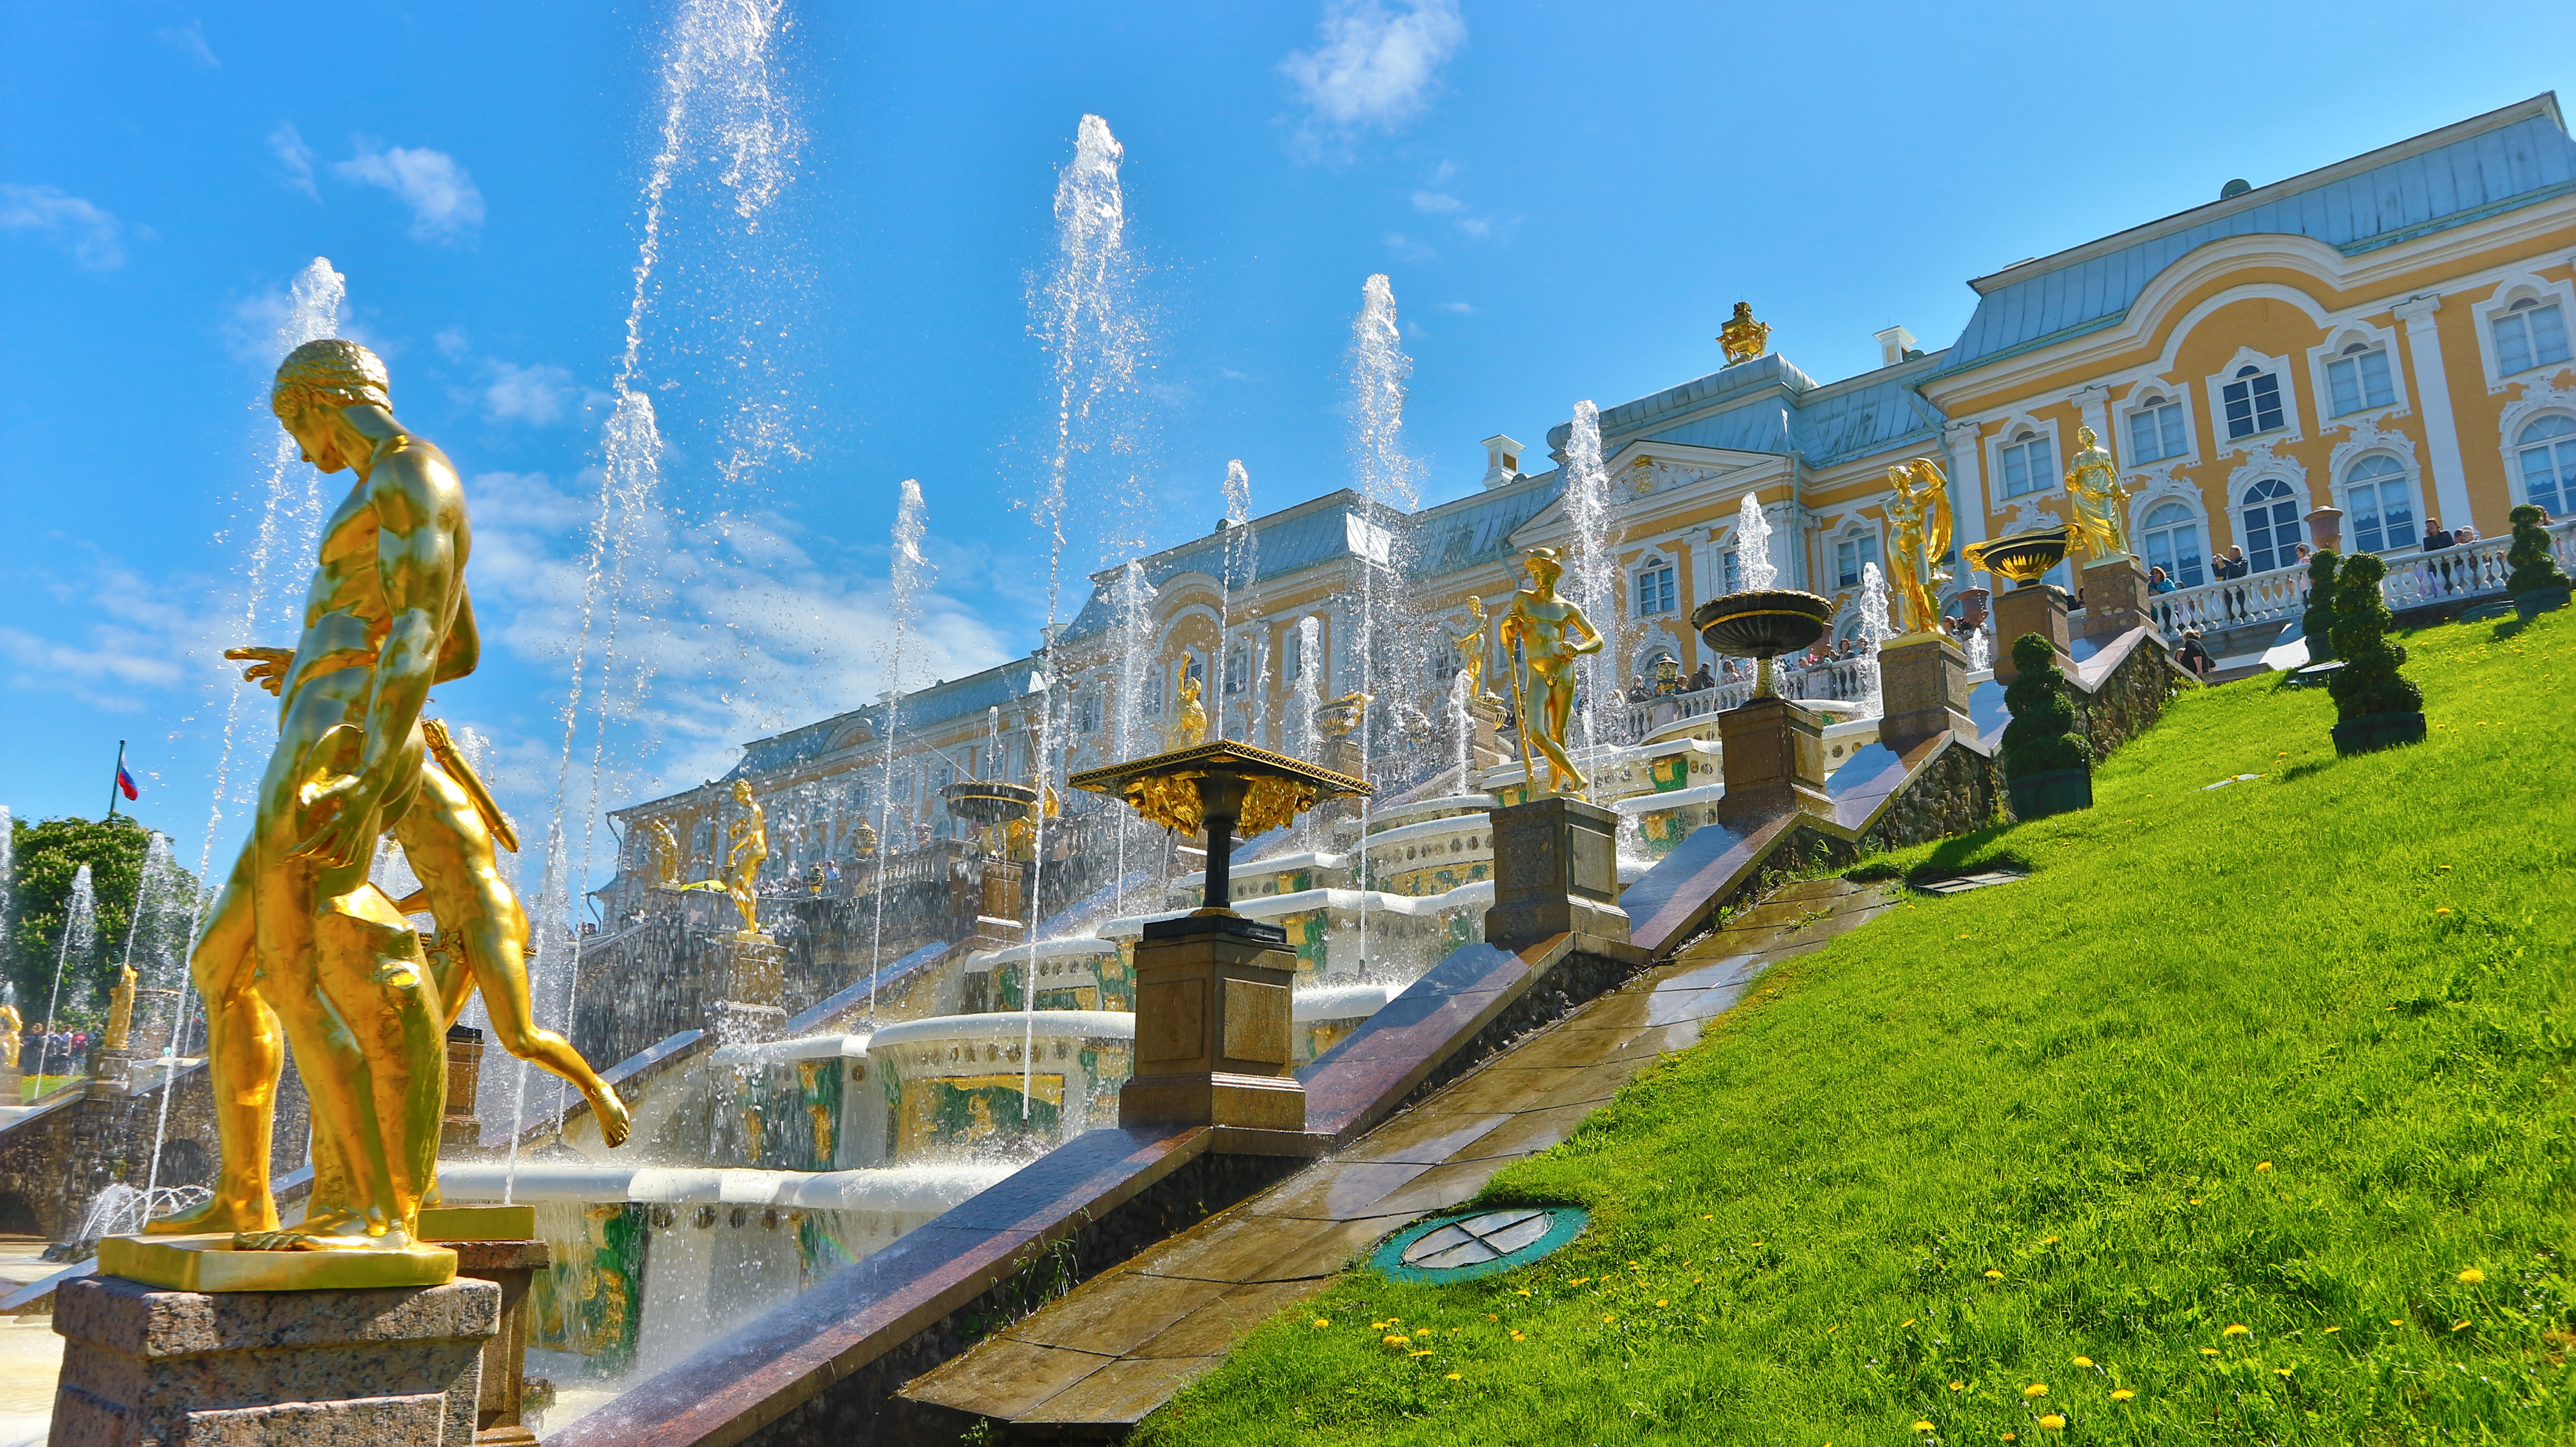 General 5184x2912 Peterhof Russia St. Petersburg palace nature fountain summer statue architecture